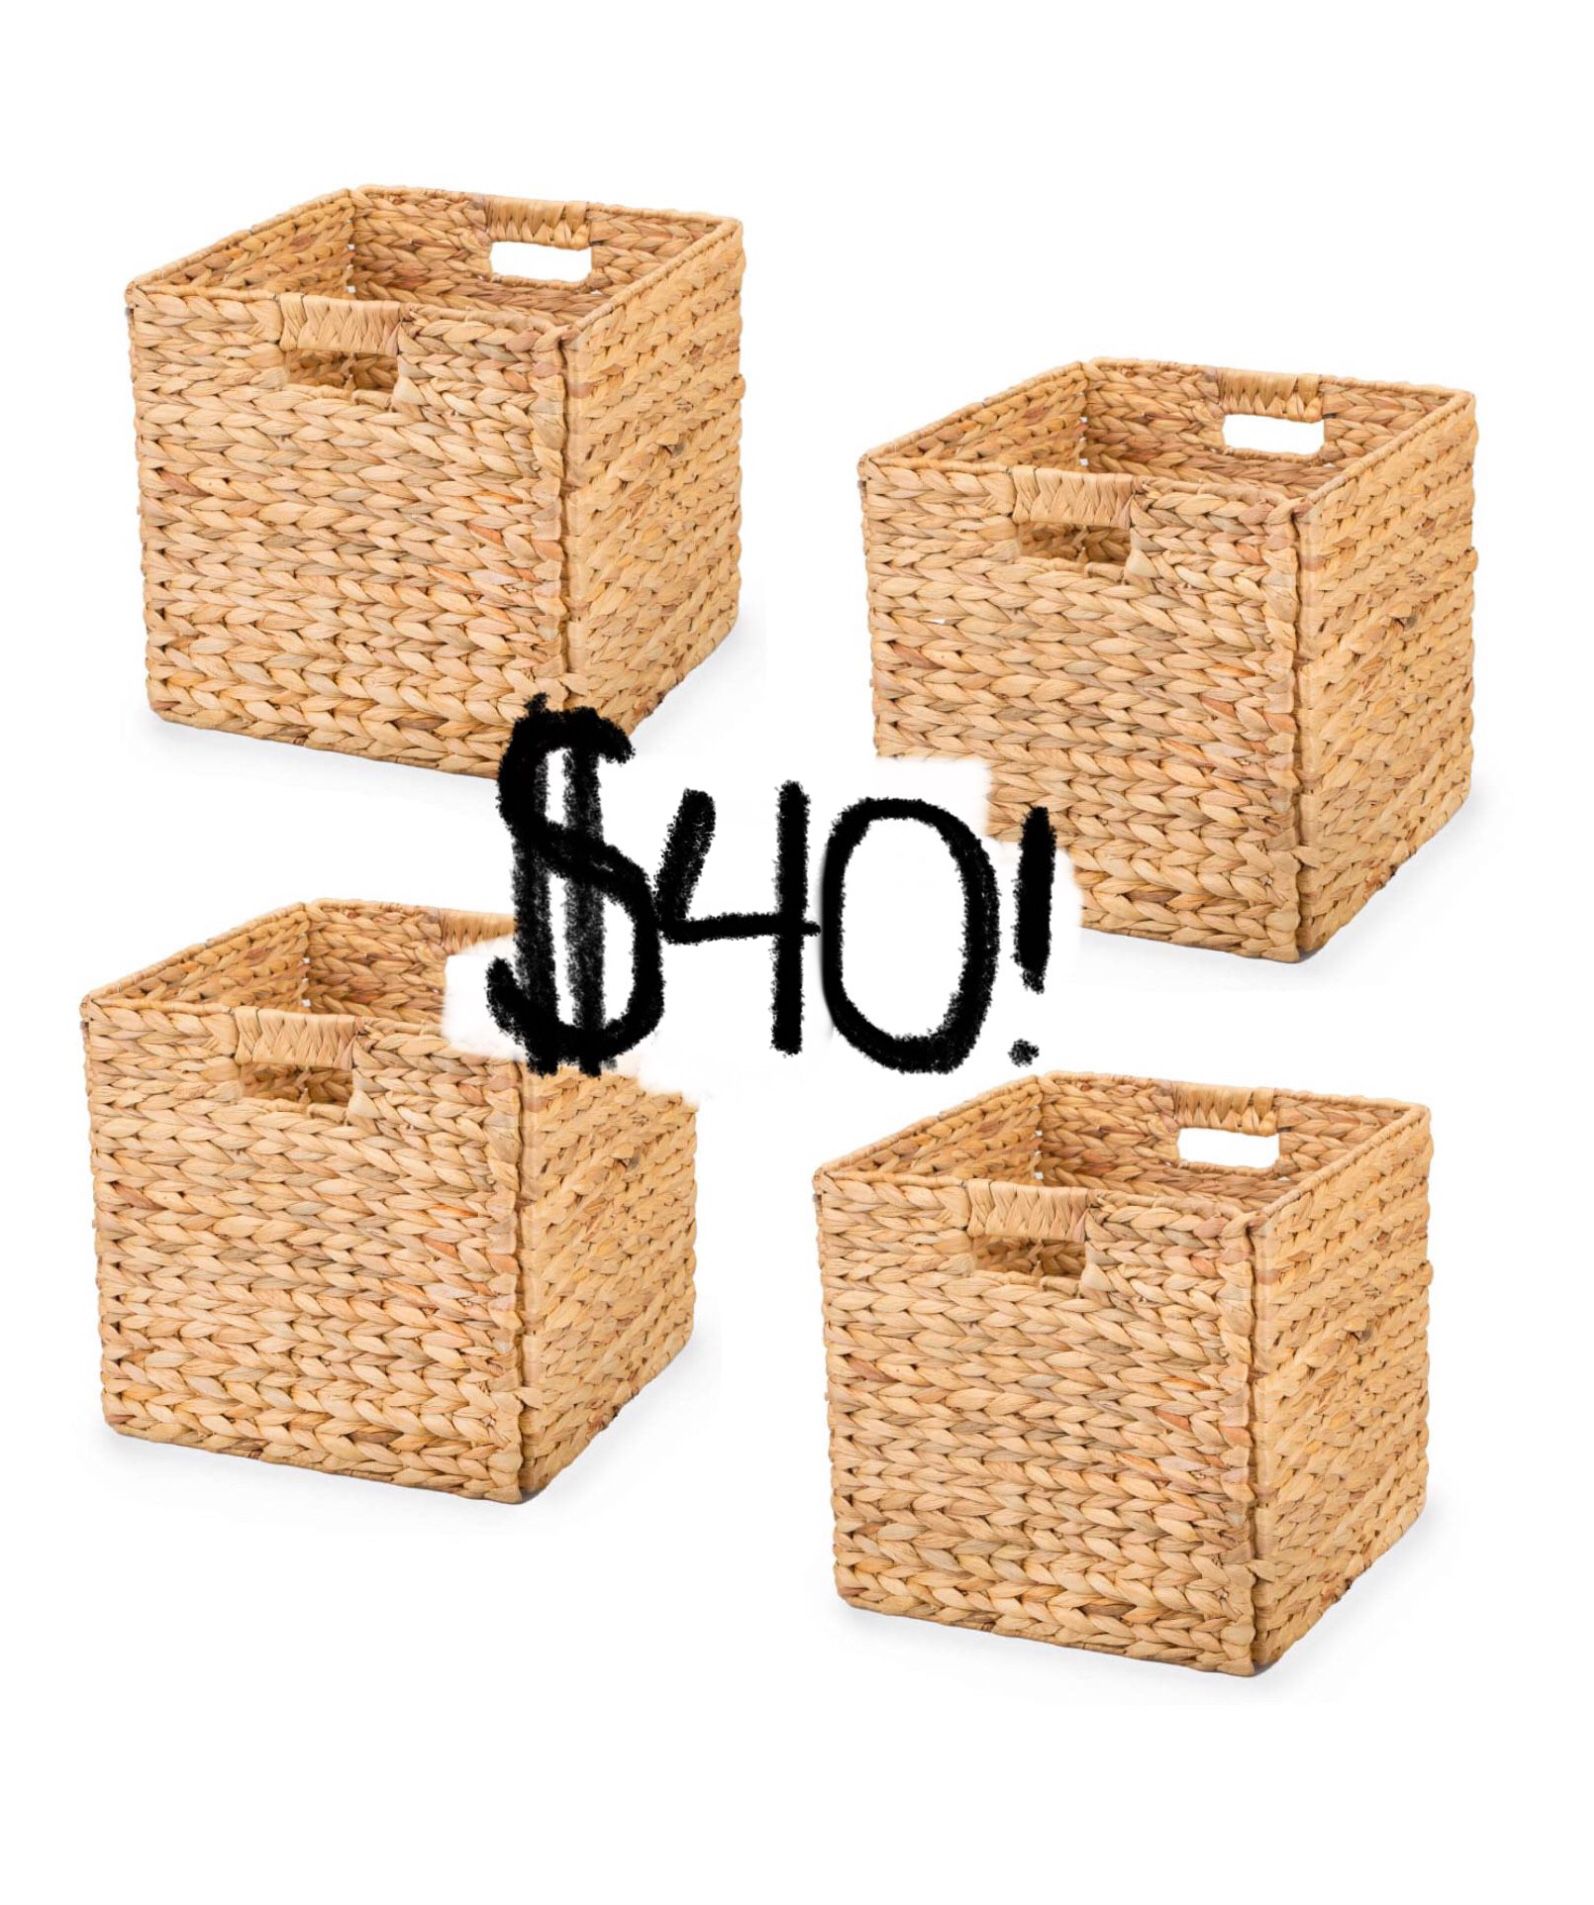 LilaCraft Set 4 Natural Storage Baskets For Organizing, Water Hyacinth Storage Baskets, Rope Woven Baskets For Storage With Carrying Handles Decor, Br